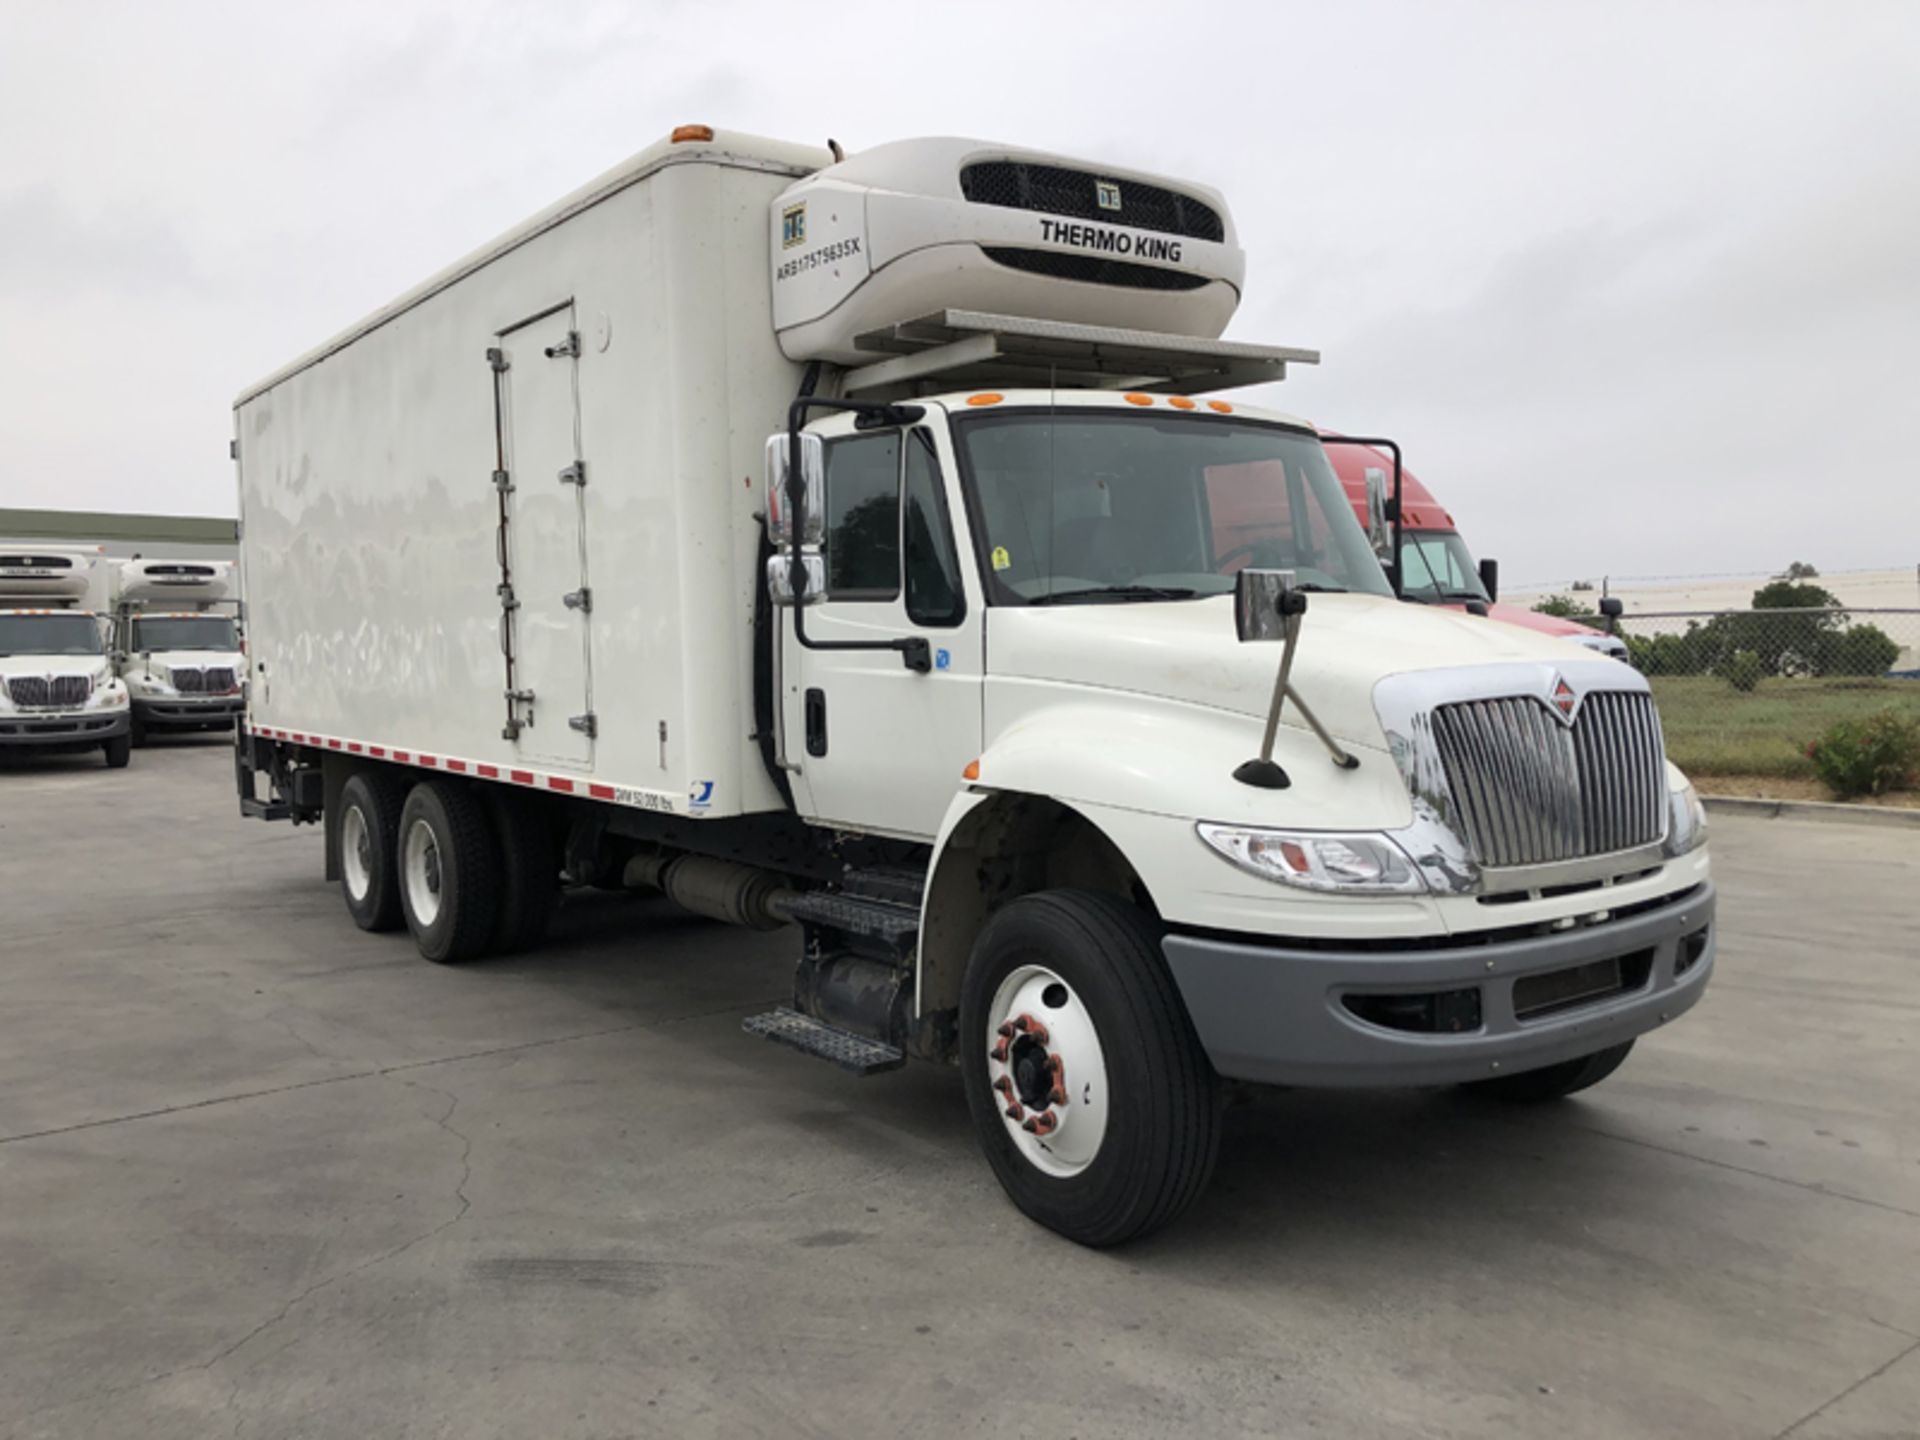 2018 INTERNATIONAL 4400 SBA 6X4 REFRIGERATED BOX TRUCK VIN#: 1HTMSTAR0JH529609, Approx Miles: 65133, - Image 3 of 10